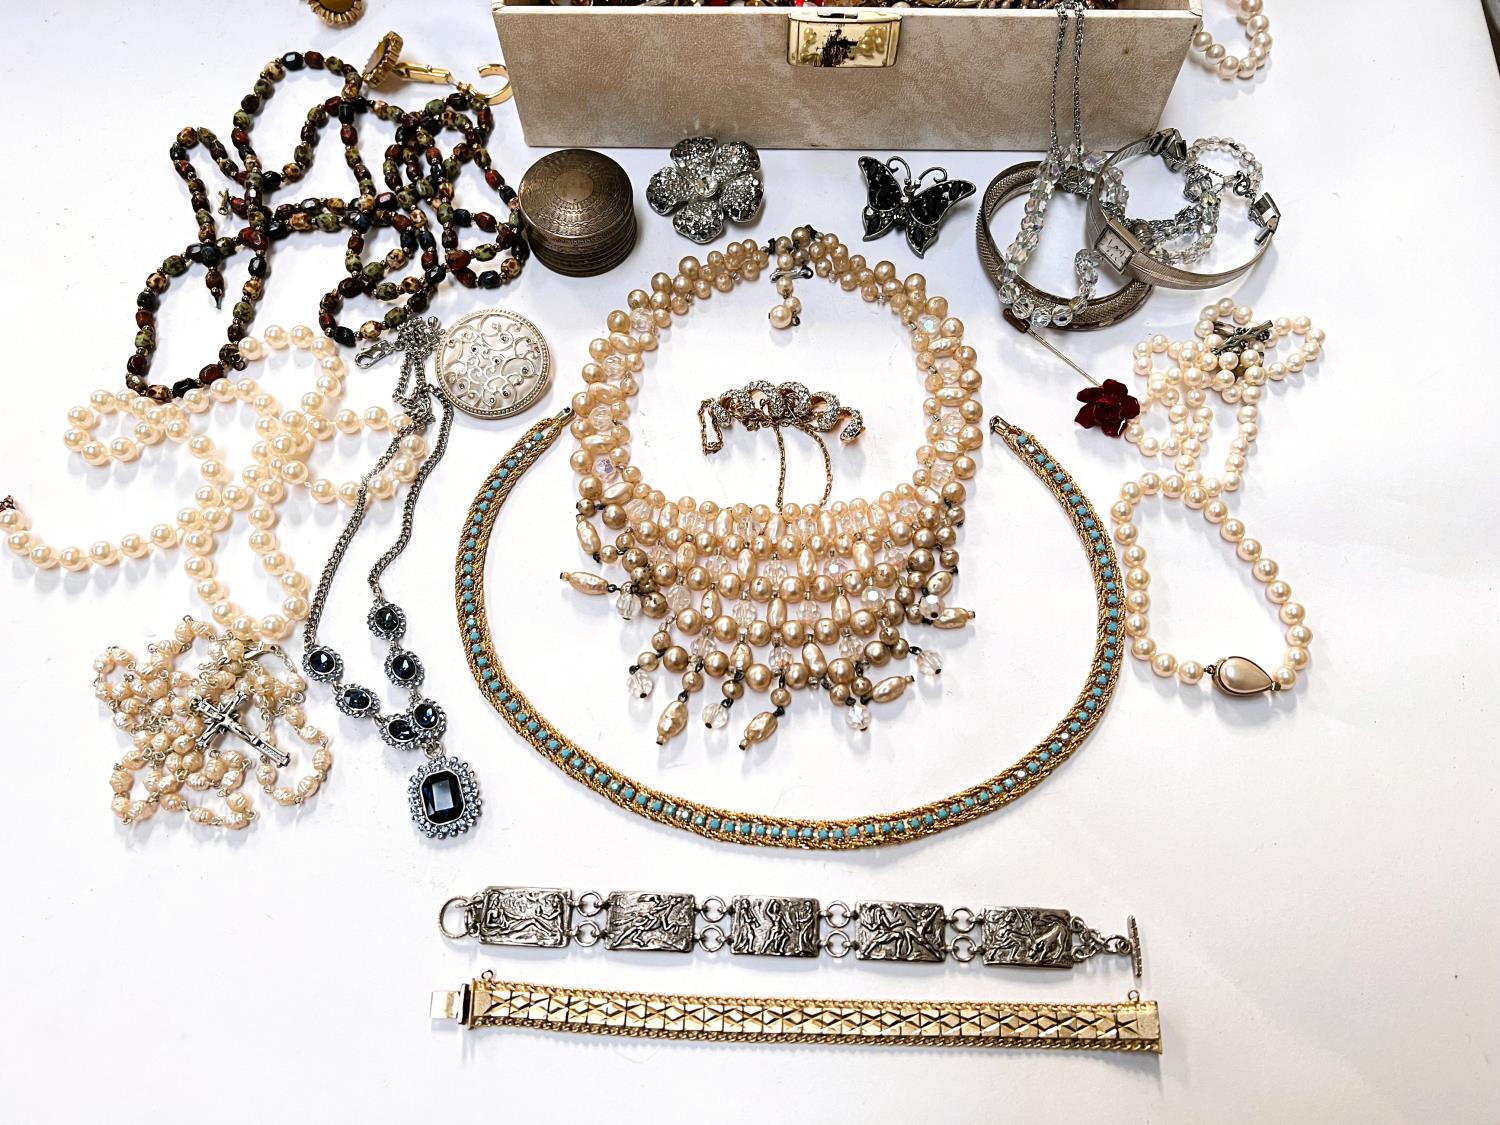 A selection of costume jewellery in jewellery box including pearl necklaces, diamante, beads etc - Image 2 of 2